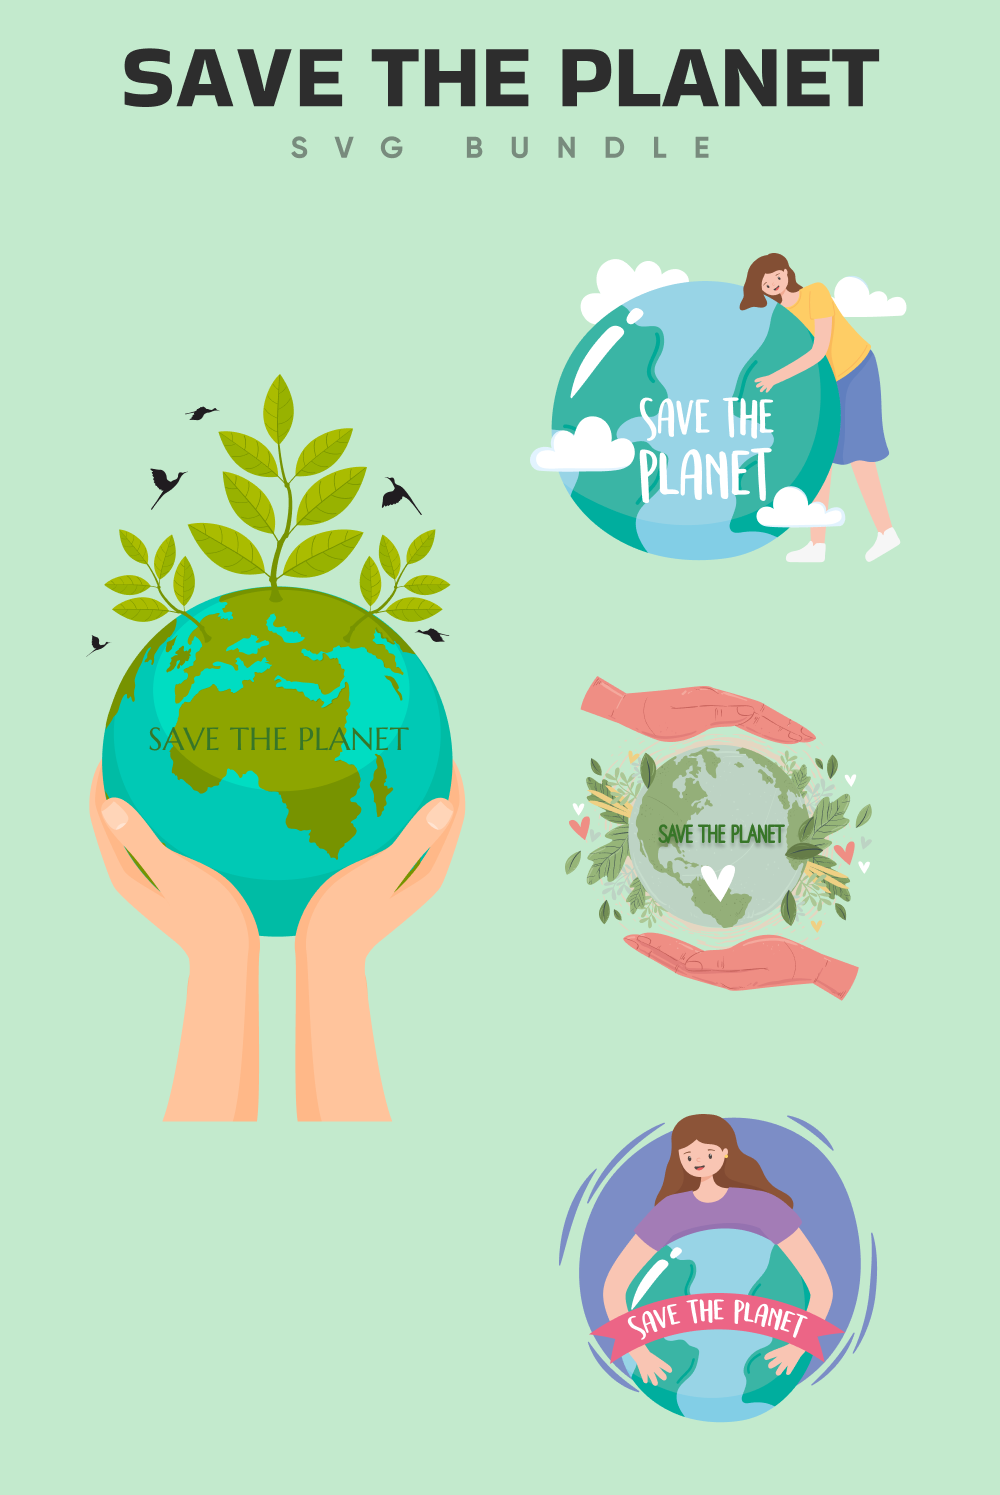 Save the planet svg of pinterest.